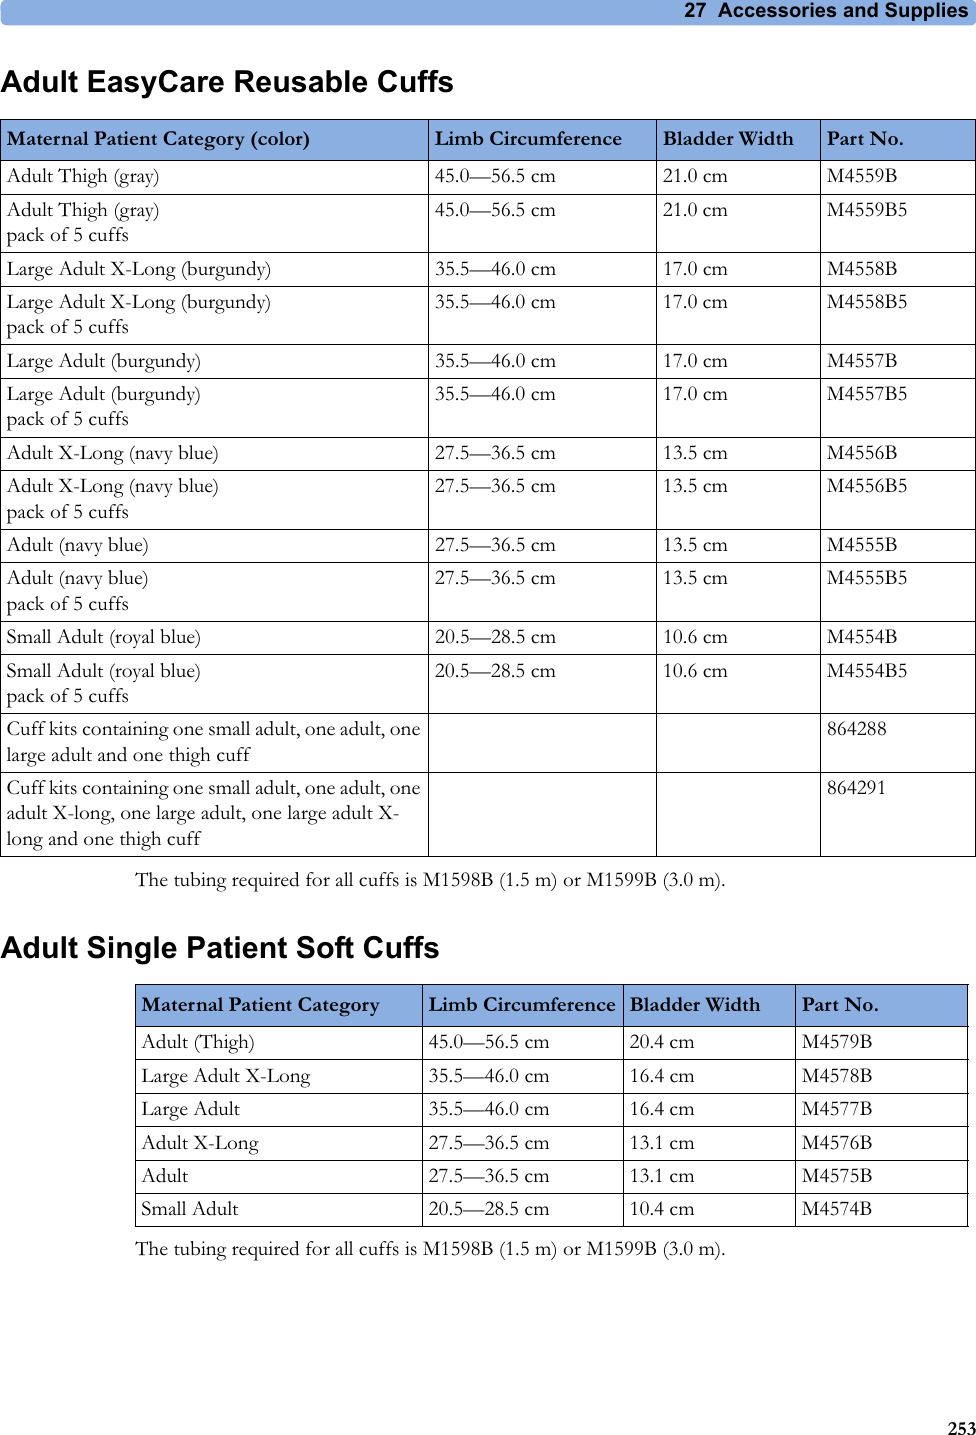 27  Accessories and Supplies253Adult EasyCare Reusable CuffsThe tubing required for all cuffs is M1598B (1.5 m) or M1599B (3.0 m).Adult Single Patient Soft CuffsThe tubing required for all cuffs is M1598B (1.5 m) or M1599B (3.0 m).Maternal Patient Category (color) Limb Circumference Bladder Width Part No.Adult Thigh (gray) 45.0—56.5 cm 21.0 cm M4559BAdult Thigh (gray) pack of 5 cuffs45.0—56.5 cm 21.0 cm M4559B5Large Adult X-Long (burgundy) 35.5—46.0 cm 17.0 cm M4558BLarge Adult X-Long (burgundy) pack of 5 cuffs35.5—46.0 cm 17.0 cm M4558B5Large Adult (burgundy) 35.5—46.0 cm 17.0 cm M4557BLarge Adult (burgundy) pack of 5 cuffs35.5—46.0 cm 17.0 cm M4557B5Adult X-Long (navy blue) 27.5—36.5 cm 13.5 cm M4556BAdult X-Long (navy blue) pack of 5 cuffs27.5—36.5 cm 13.5 cm M4556B5Adult (navy blue) 27.5—36.5 cm 13.5 cm M4555BAdult (navy blue) pack of 5 cuffs27.5—36.5 cm 13.5 cm M4555B5Small Adult (royal blue) 20.5—28.5 cm 10.6 cm M4554BSmall Adult (royal blue) pack of 5 cuffs20.5—28.5 cm 10.6 cm M4554B5Cuff kits containing one small adult, one adult, one large adult and one thigh cuff864288Cuff kits containing one small adult, one adult, one adult X-long, one large adult, one large adult X-long and one thigh cuff864291Maternal Patient Category Limb Circumference Bladder Width Part No.Adult (Thigh) 45.0—56.5 cm 20.4 cm M4579BLarge Adult X-Long 35.5—46.0 cm 16.4 cm M4578BLarge Adult 35.5—46.0 cm 16.4 cm M4577BAdult X-Long 27.5—36.5 cm 13.1 cm M4576BAdult 27.5—36.5 cm 13.1 cm M4575BSmall Adult 20.5—28.5 cm 10.4 cm M4574B